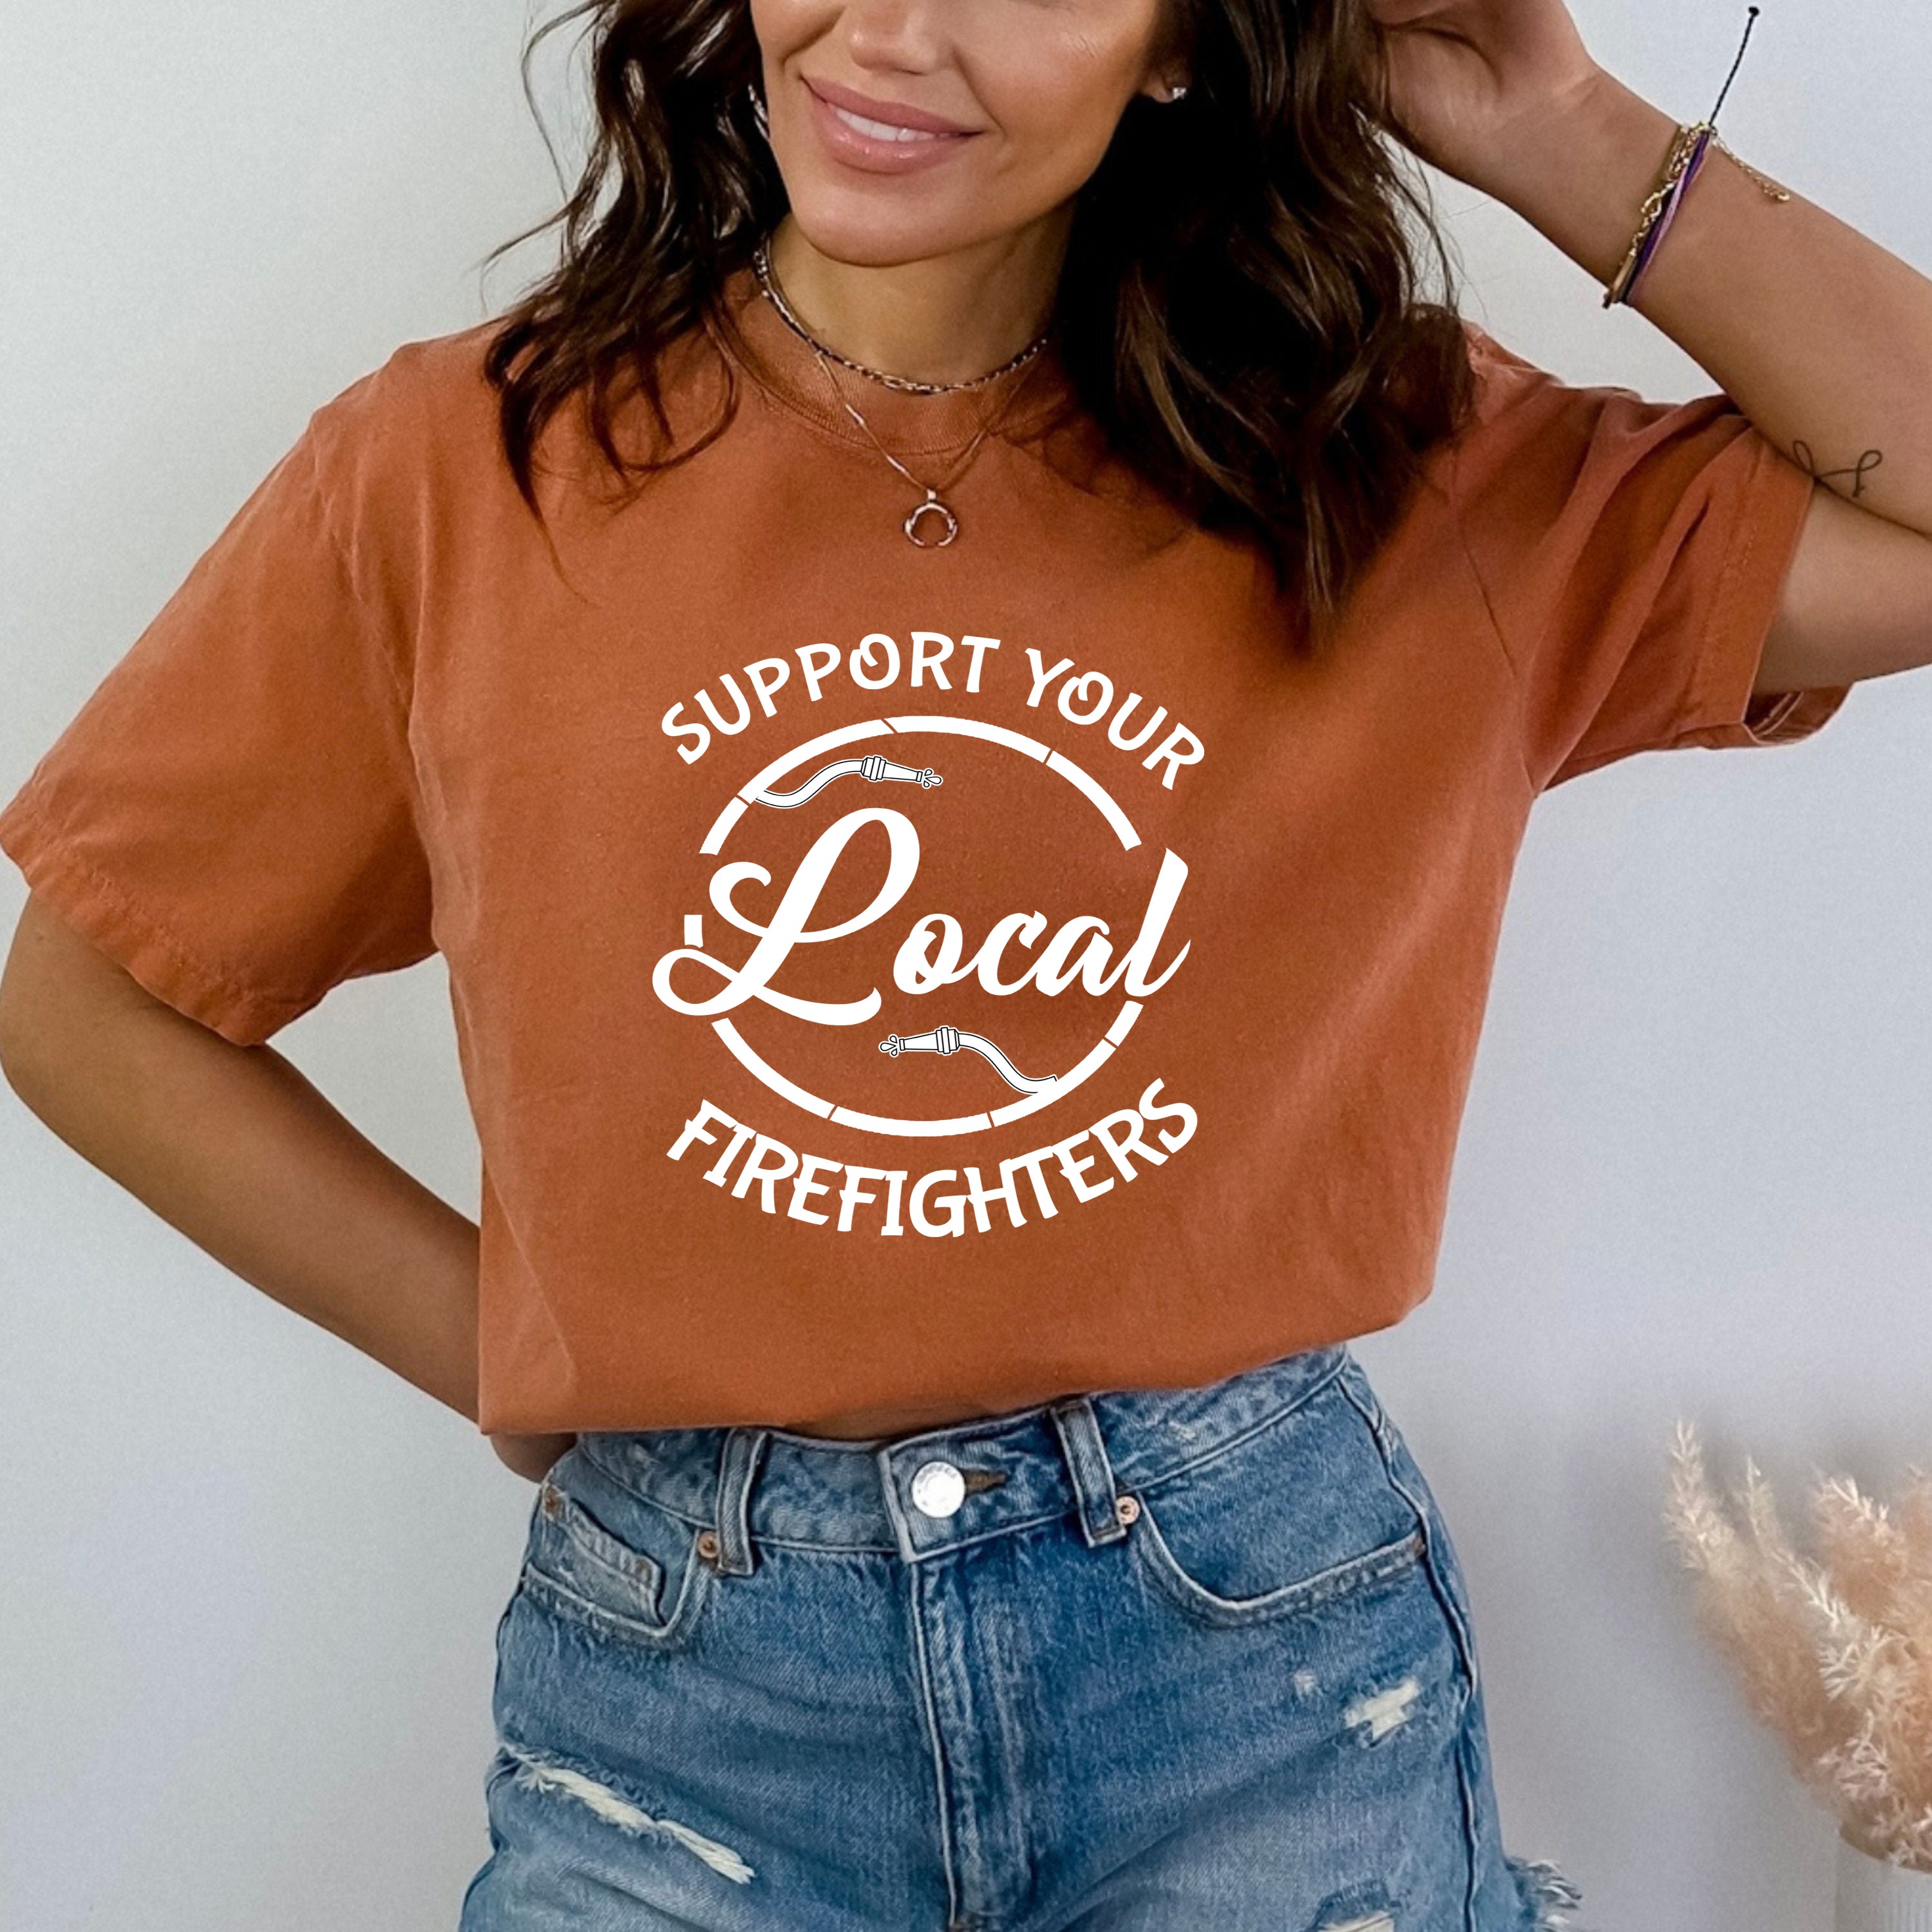 "support your fire fighter"